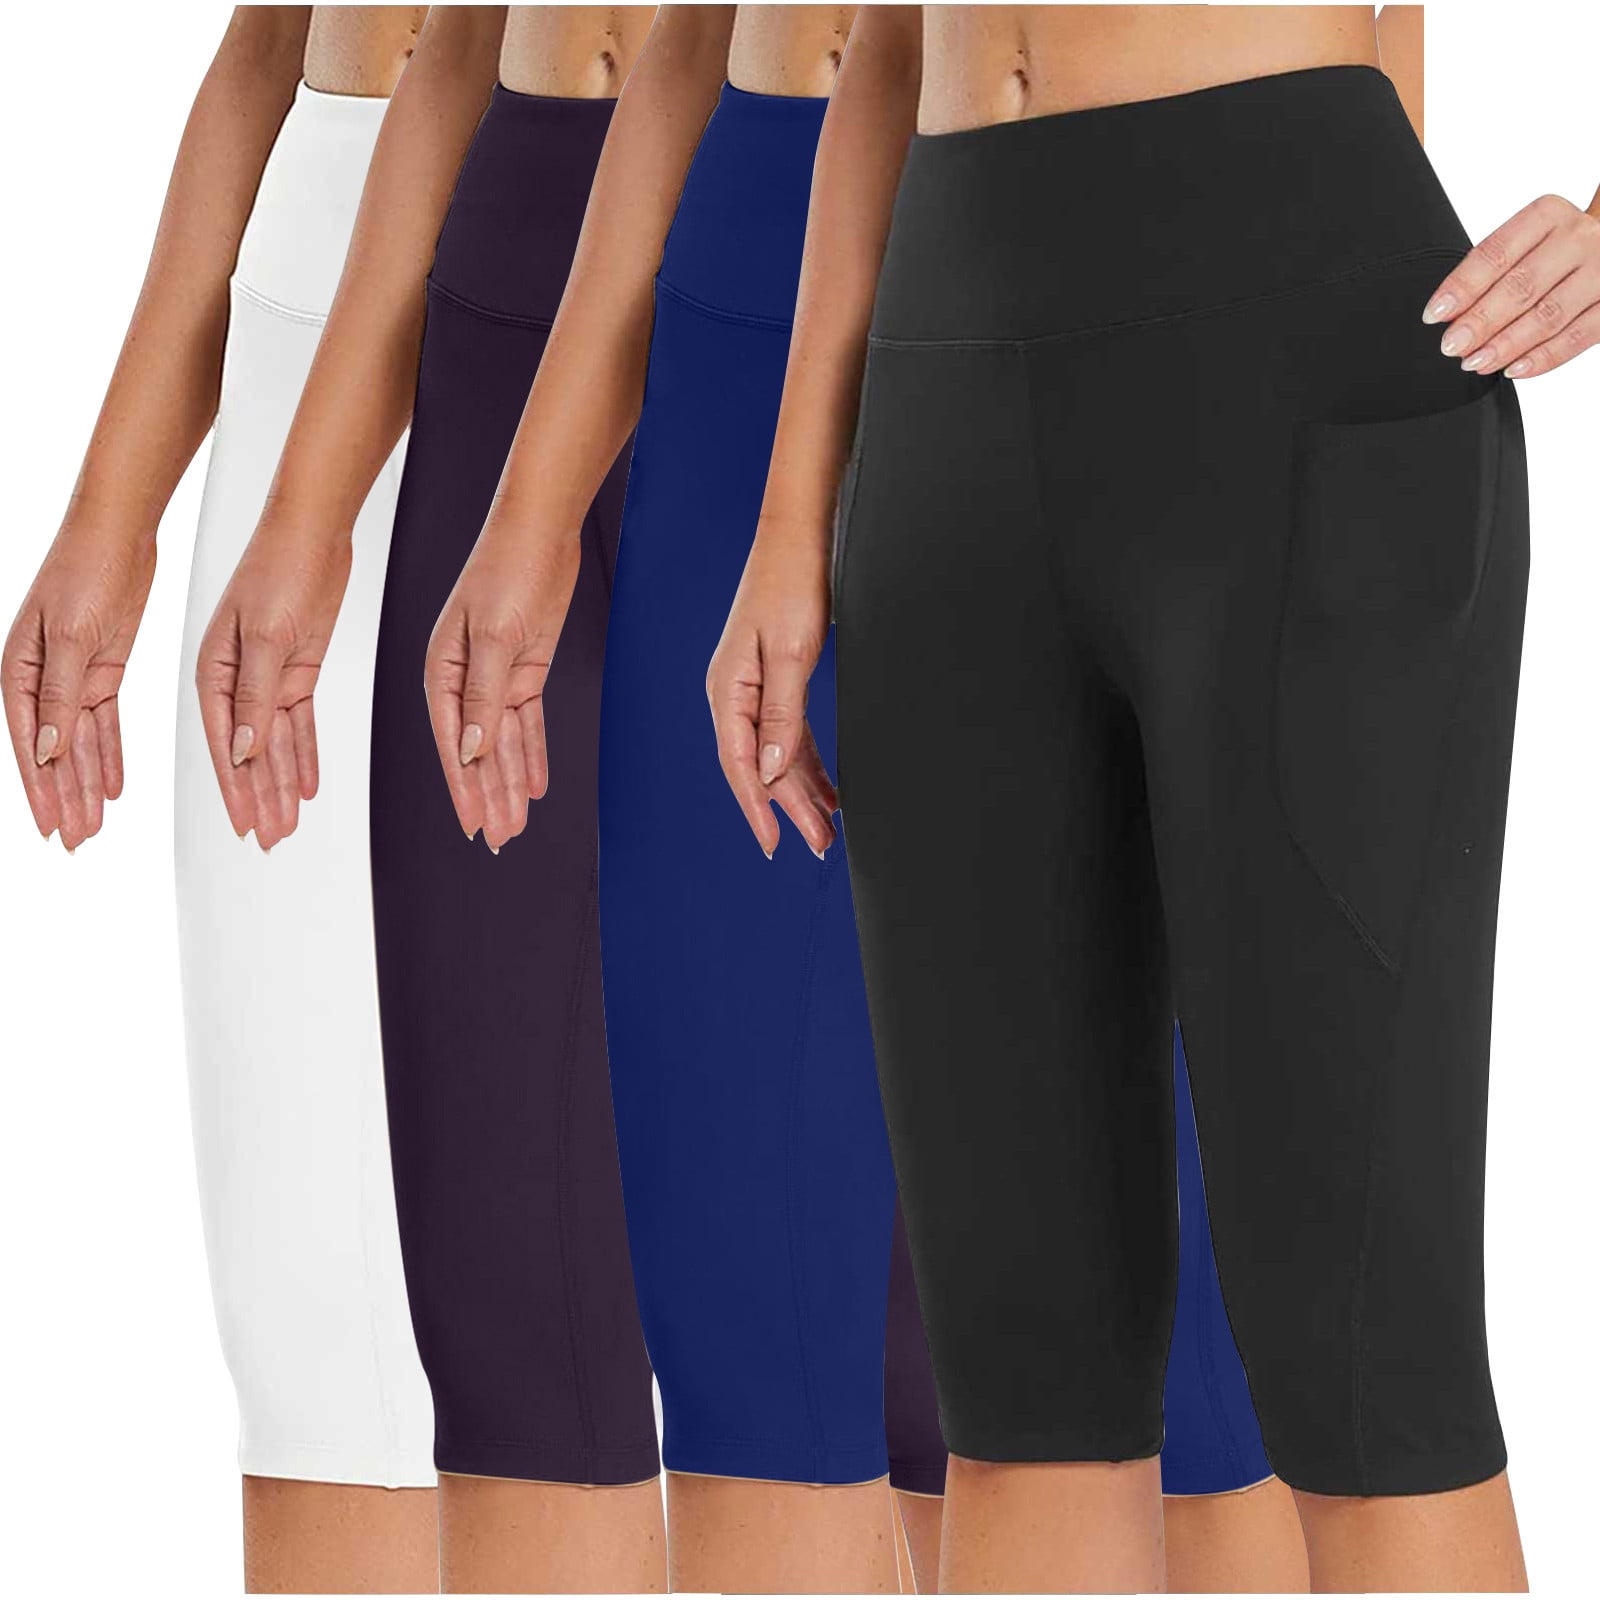  Crop Leggings with Pockets for Women Pants Colorful